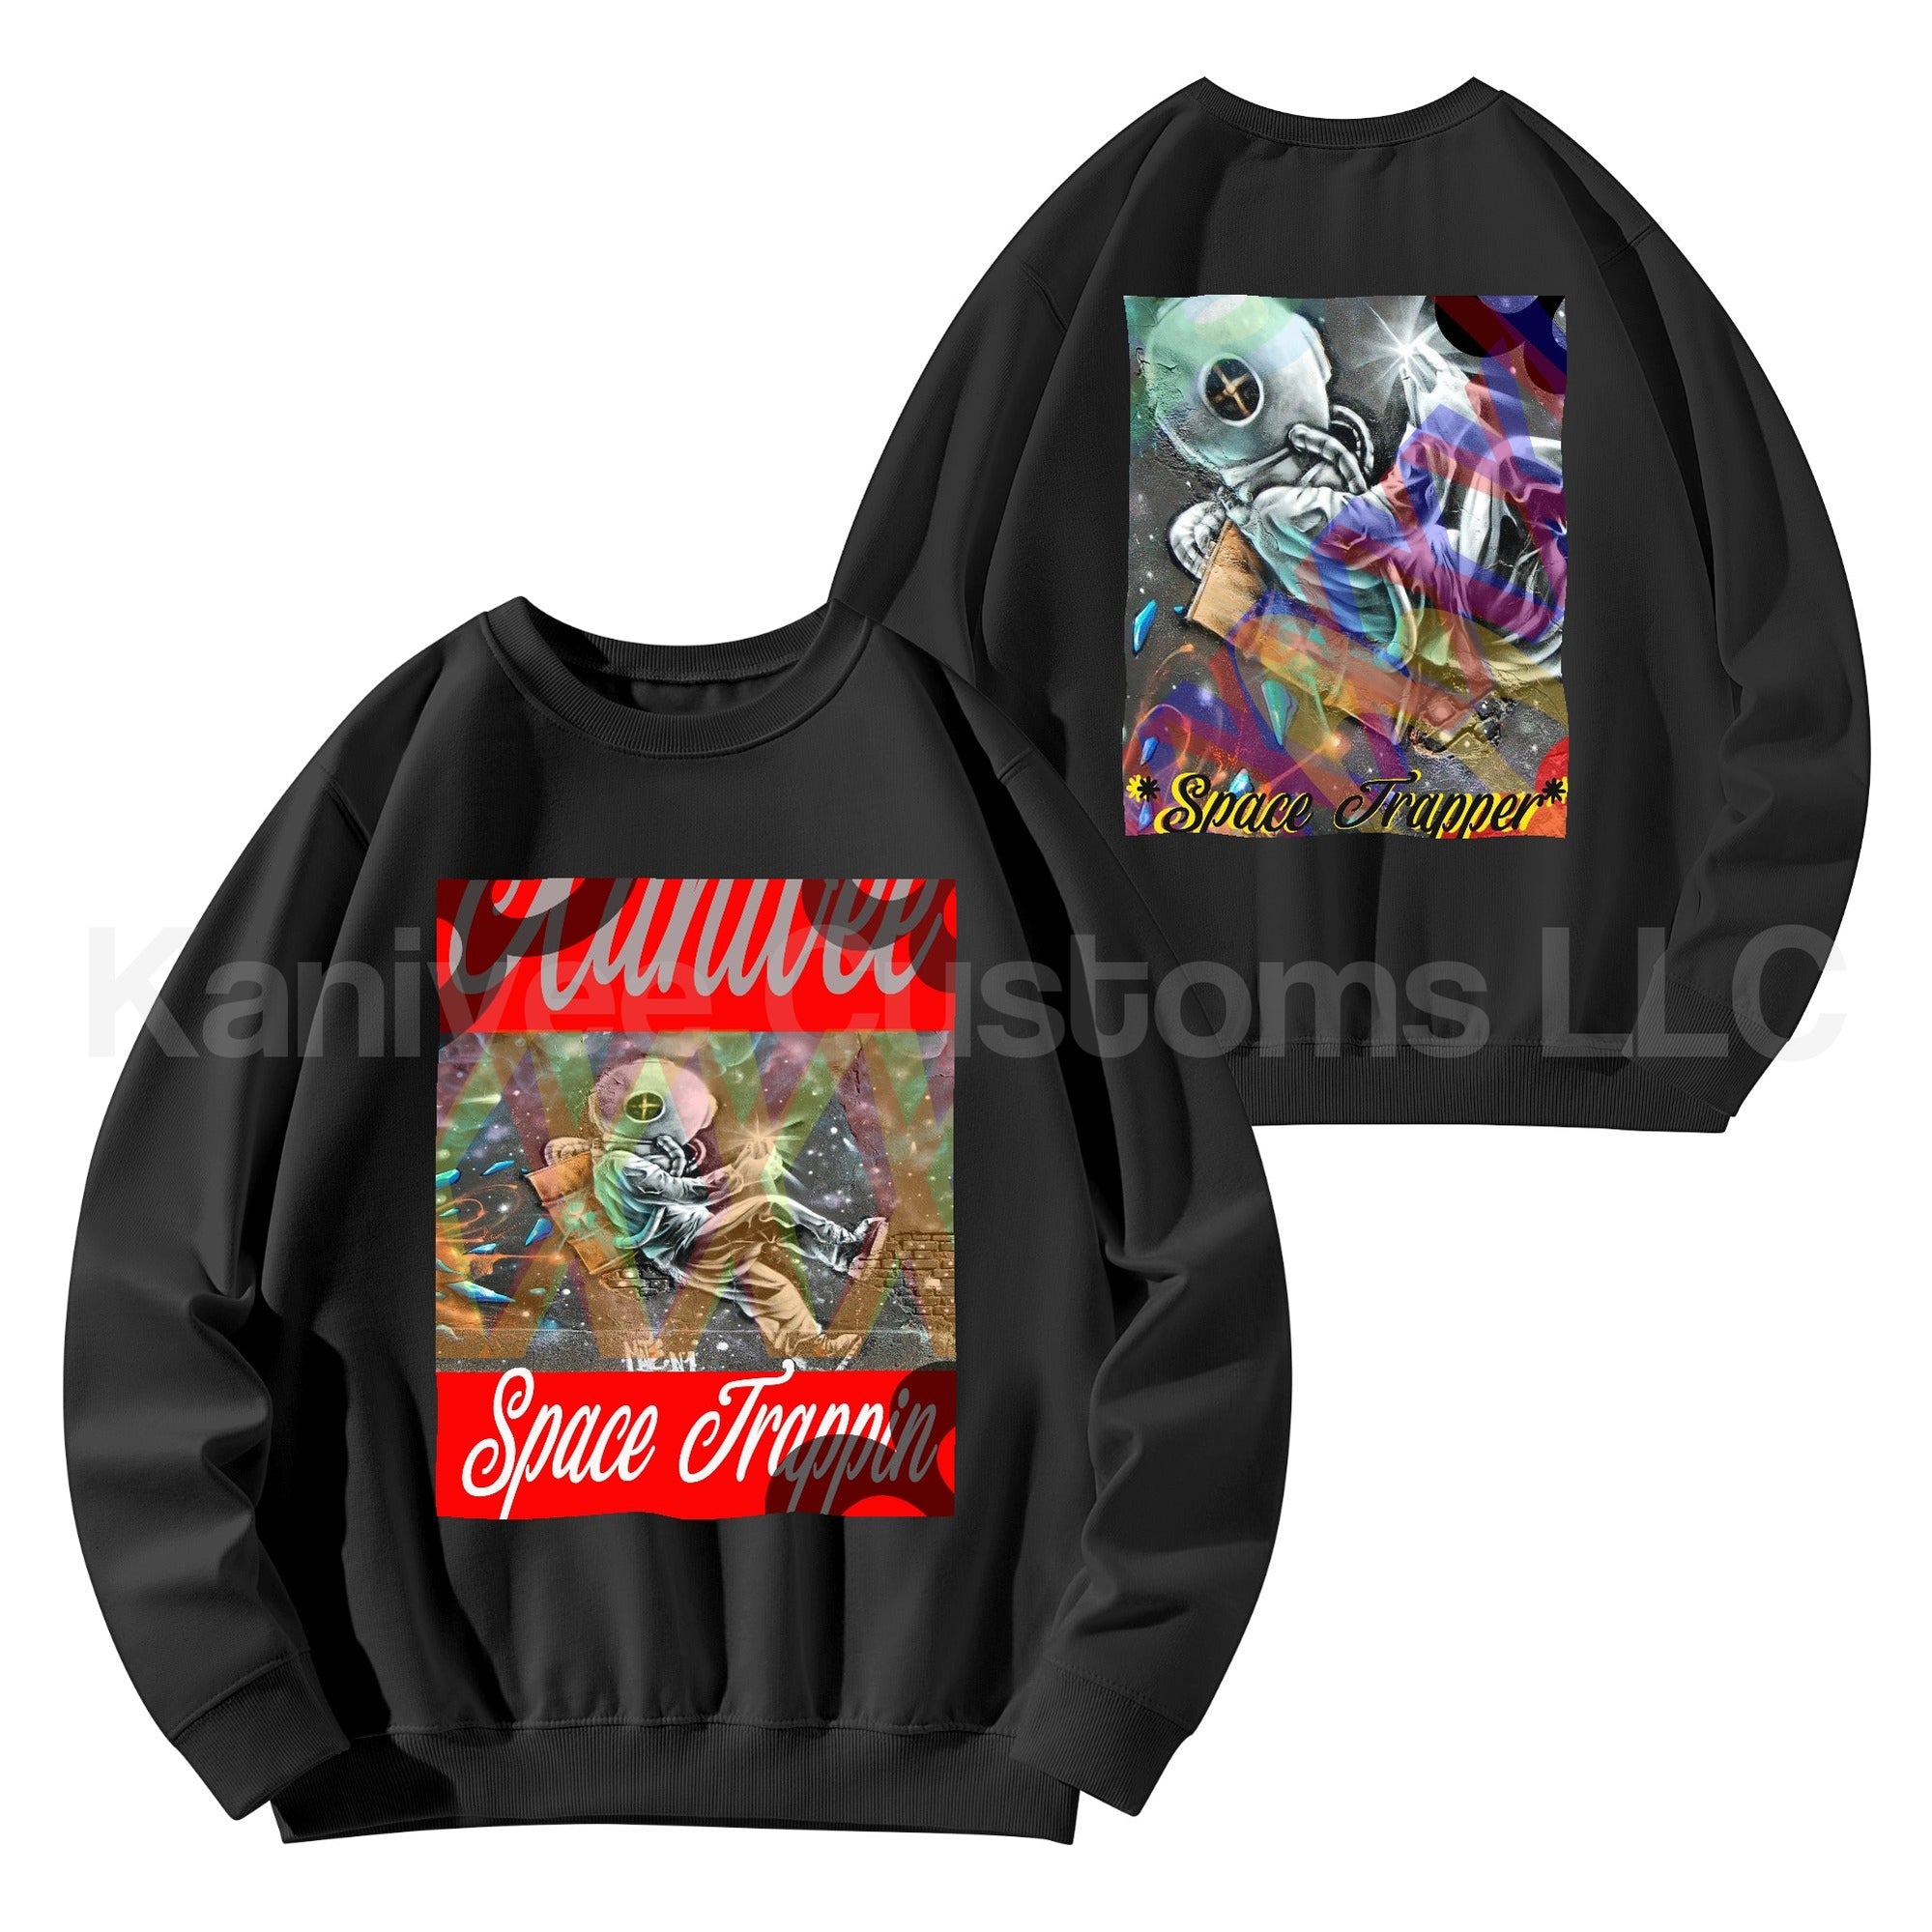 SpaceTrappin SoftCotton Sweater (Lv.2) - Kanivee Customs